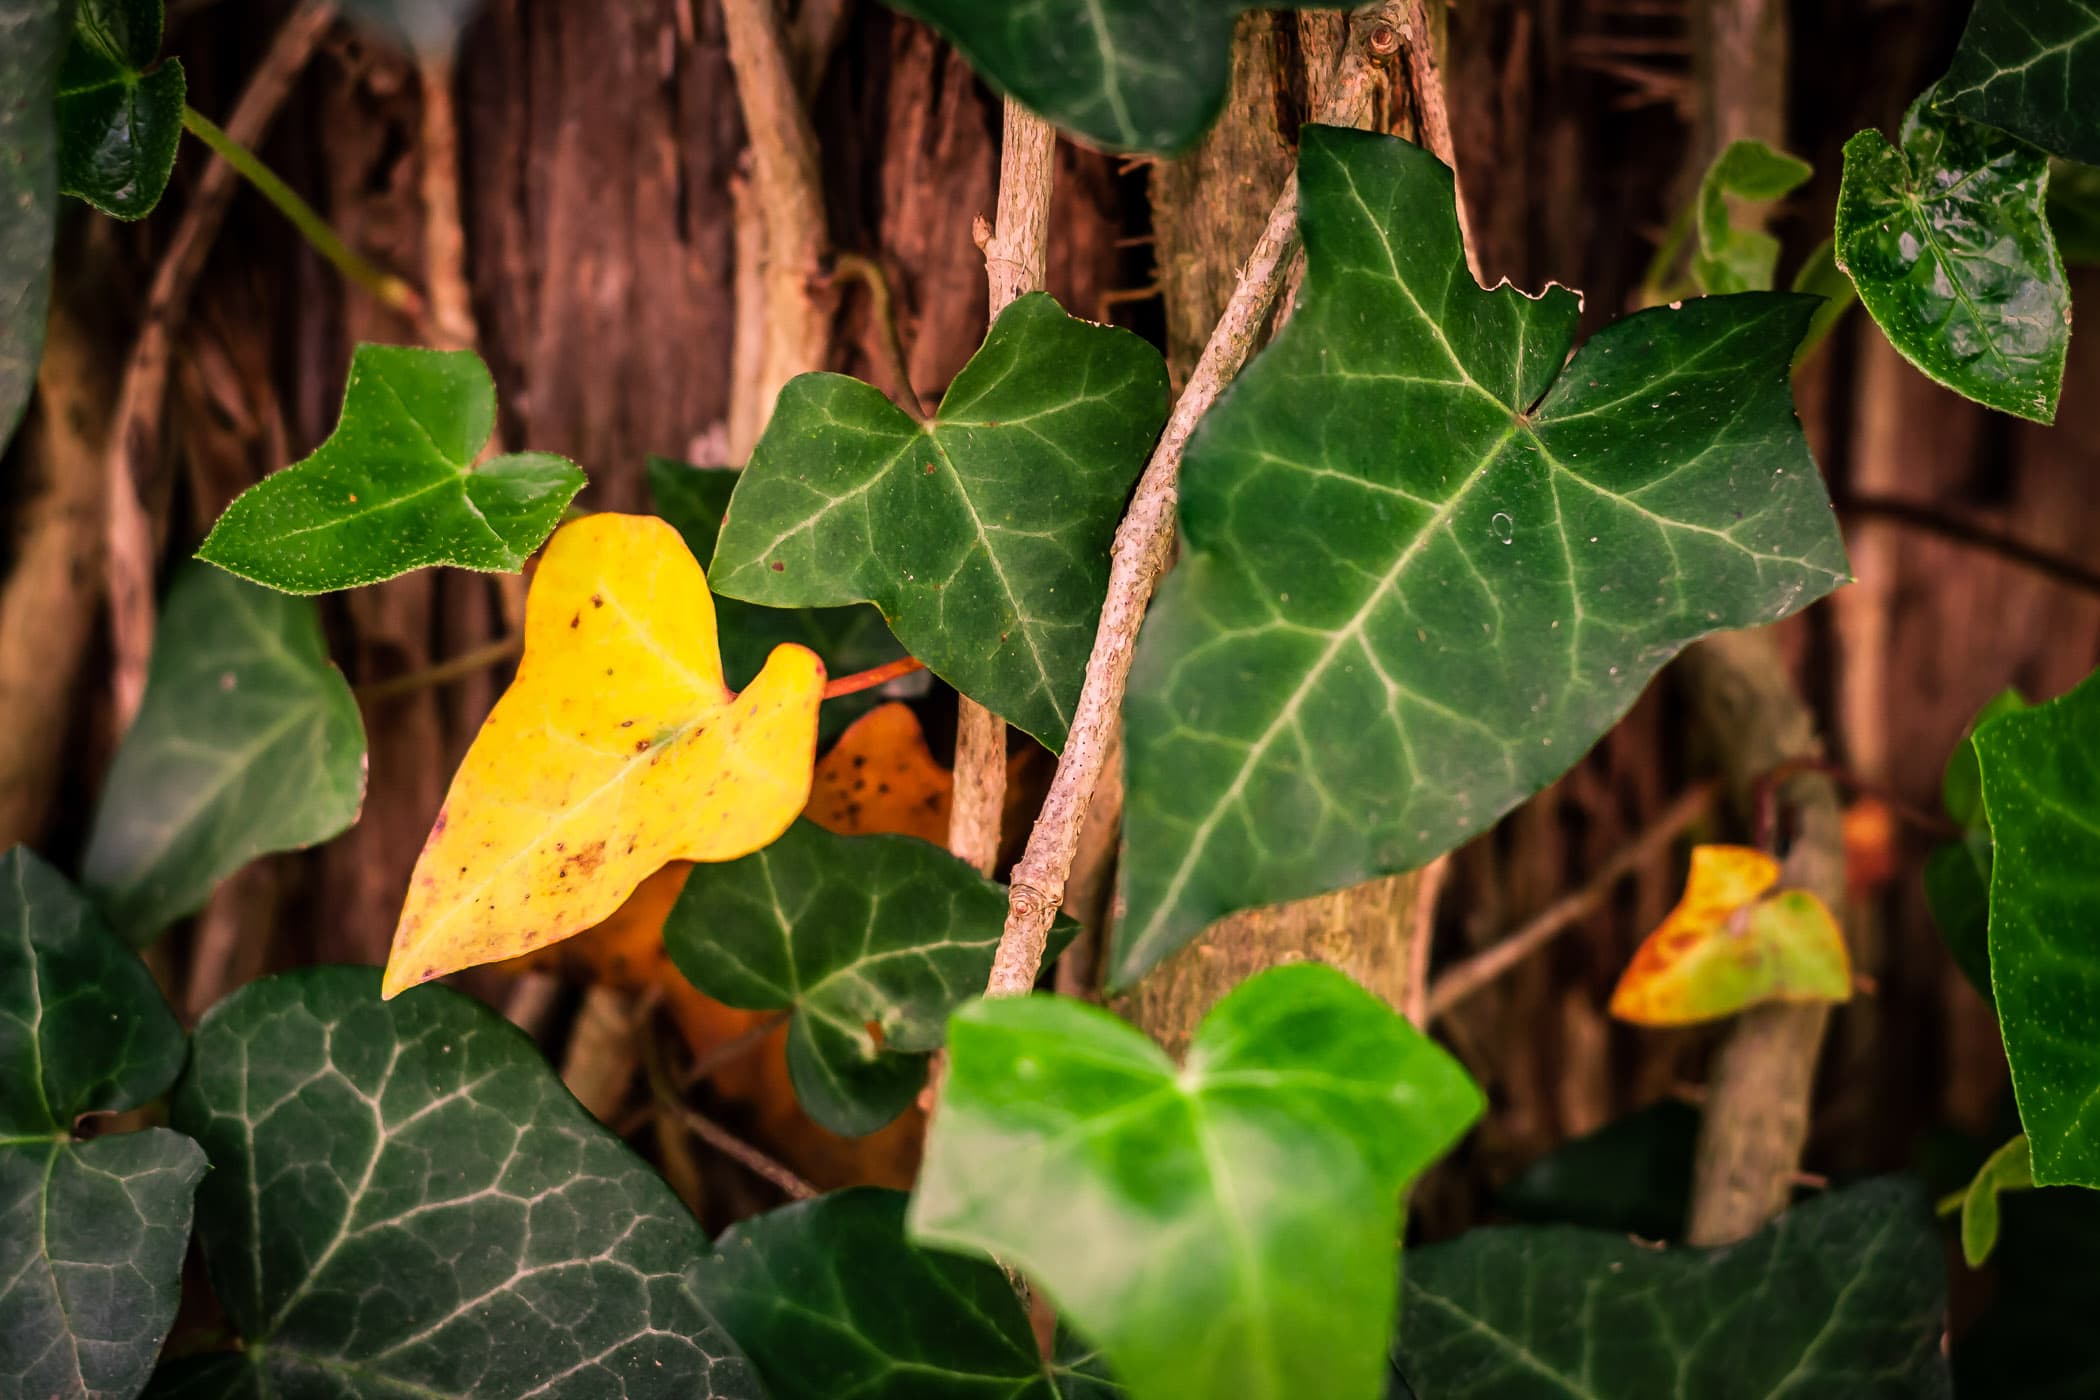 Ivy leaves growing on a tree at Bonham State Park, Texas.